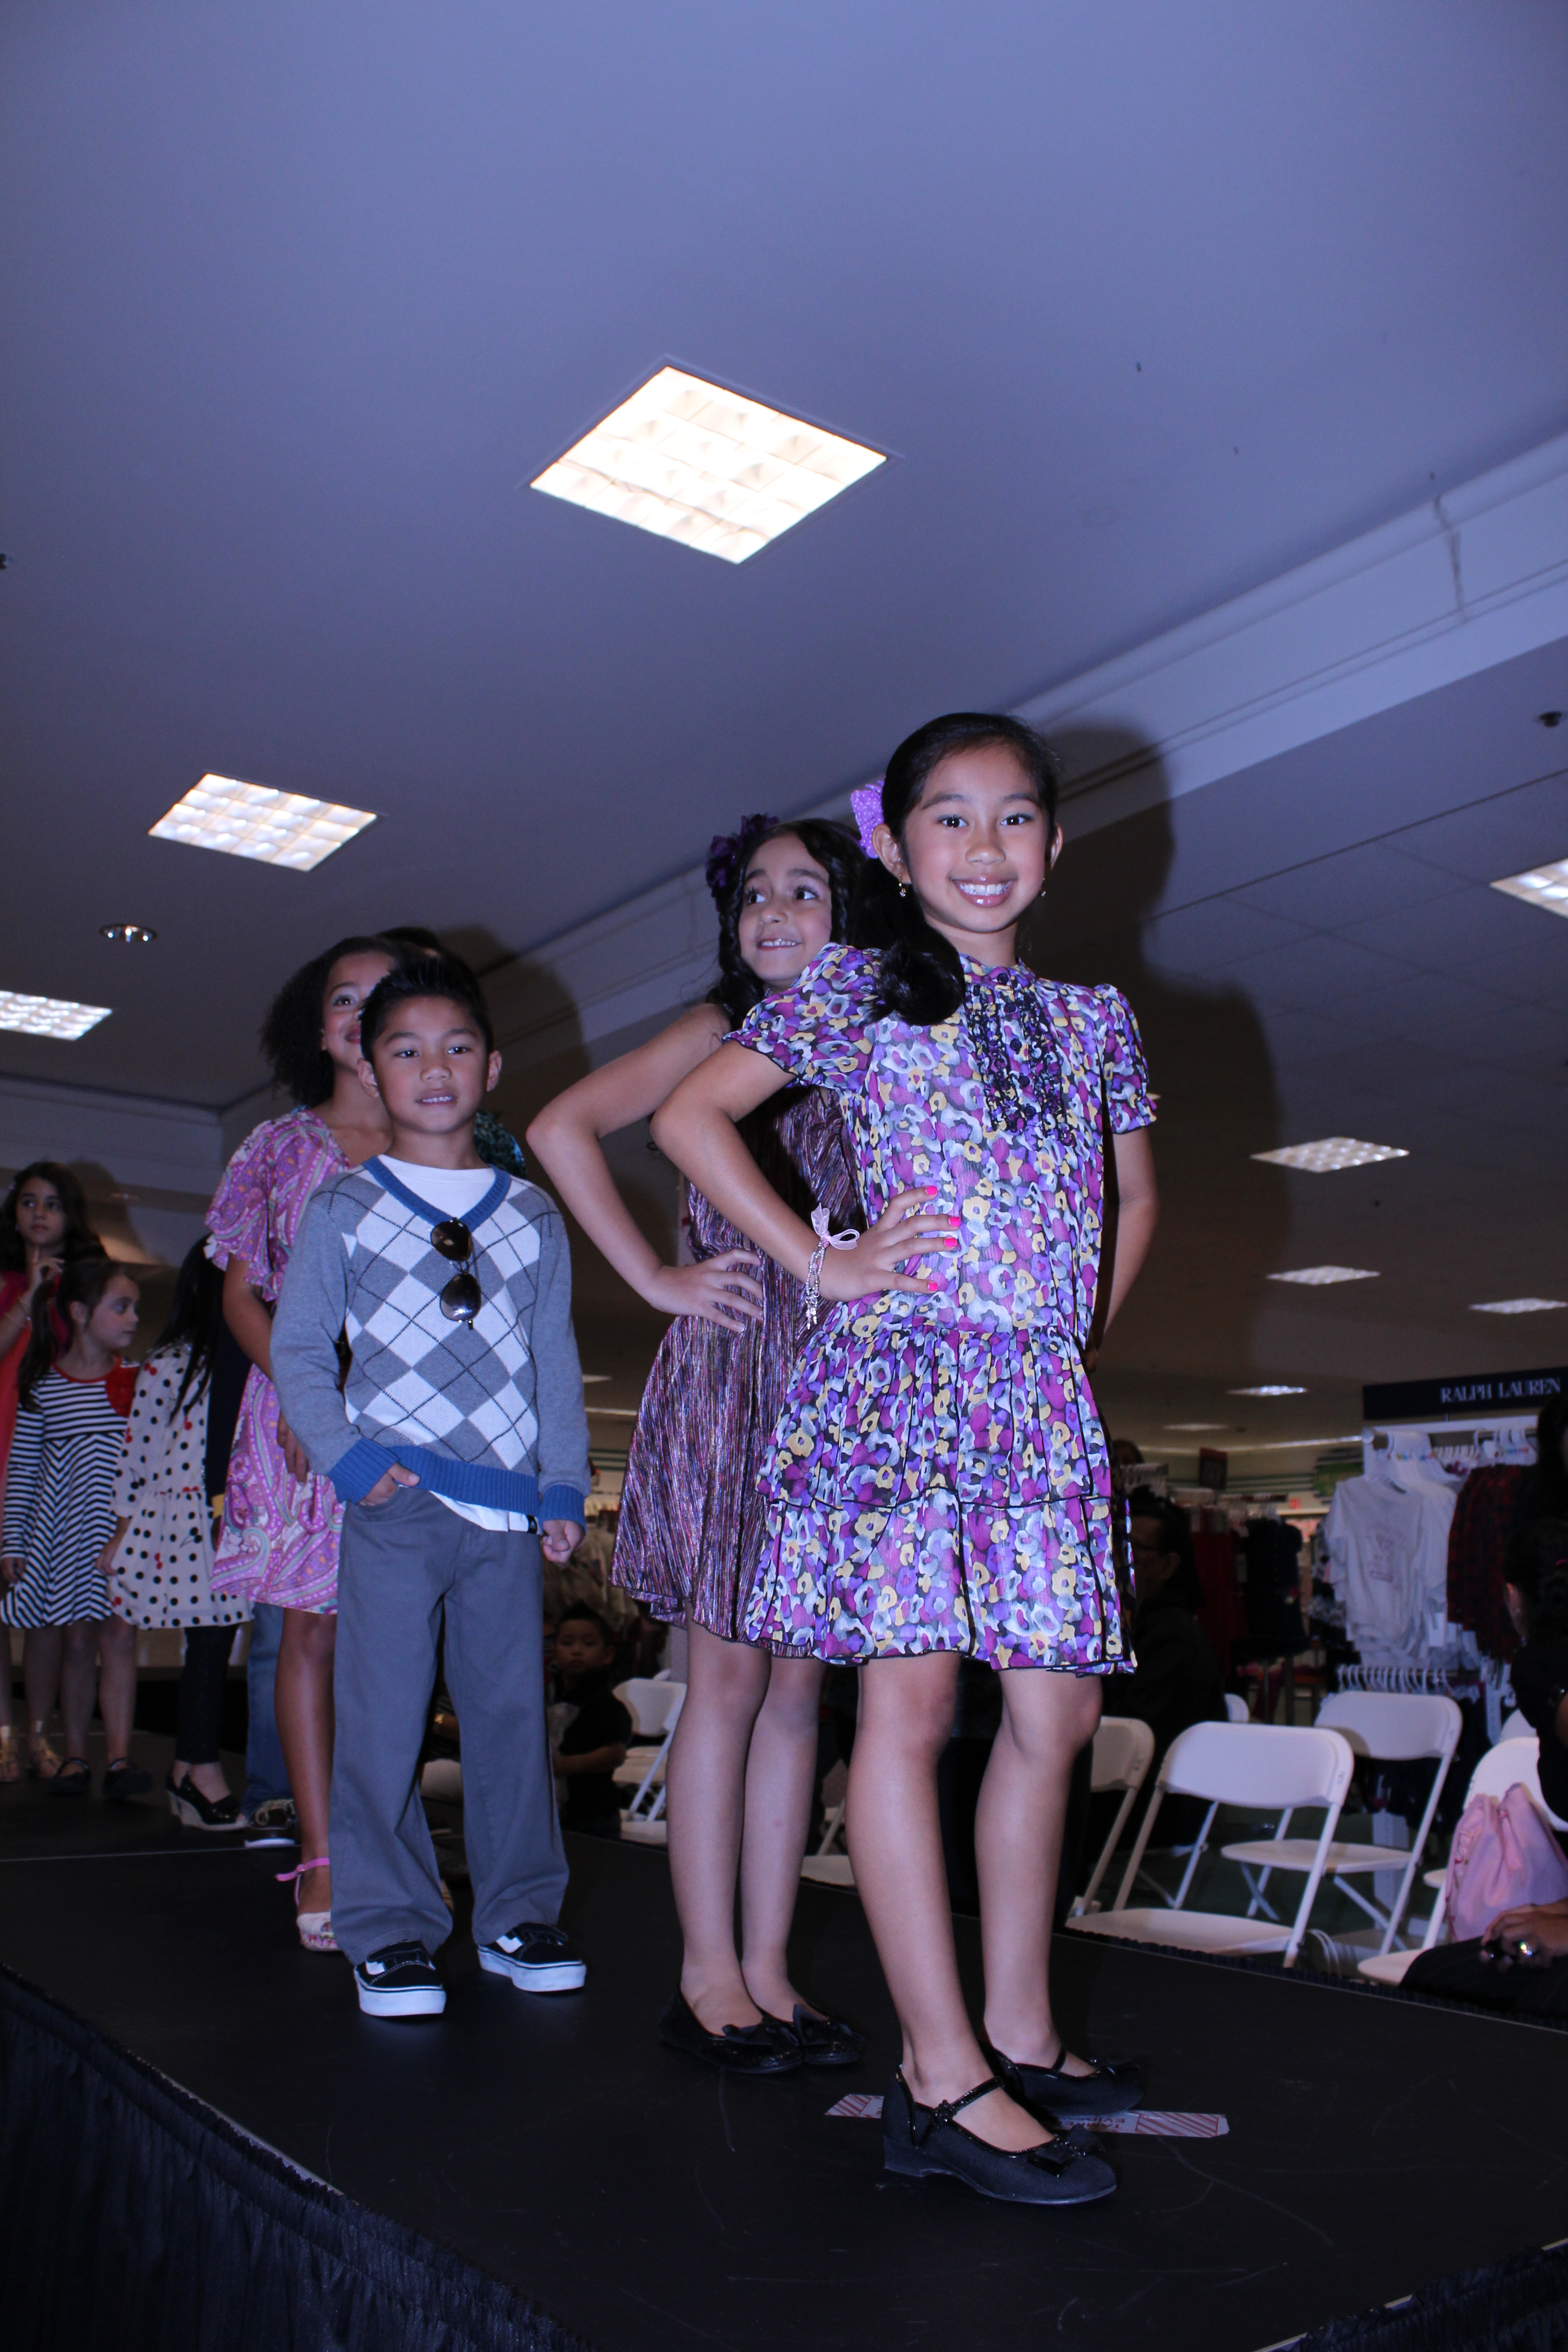 Lord and Taylor School LaLa Fashion Show - Sept 2012